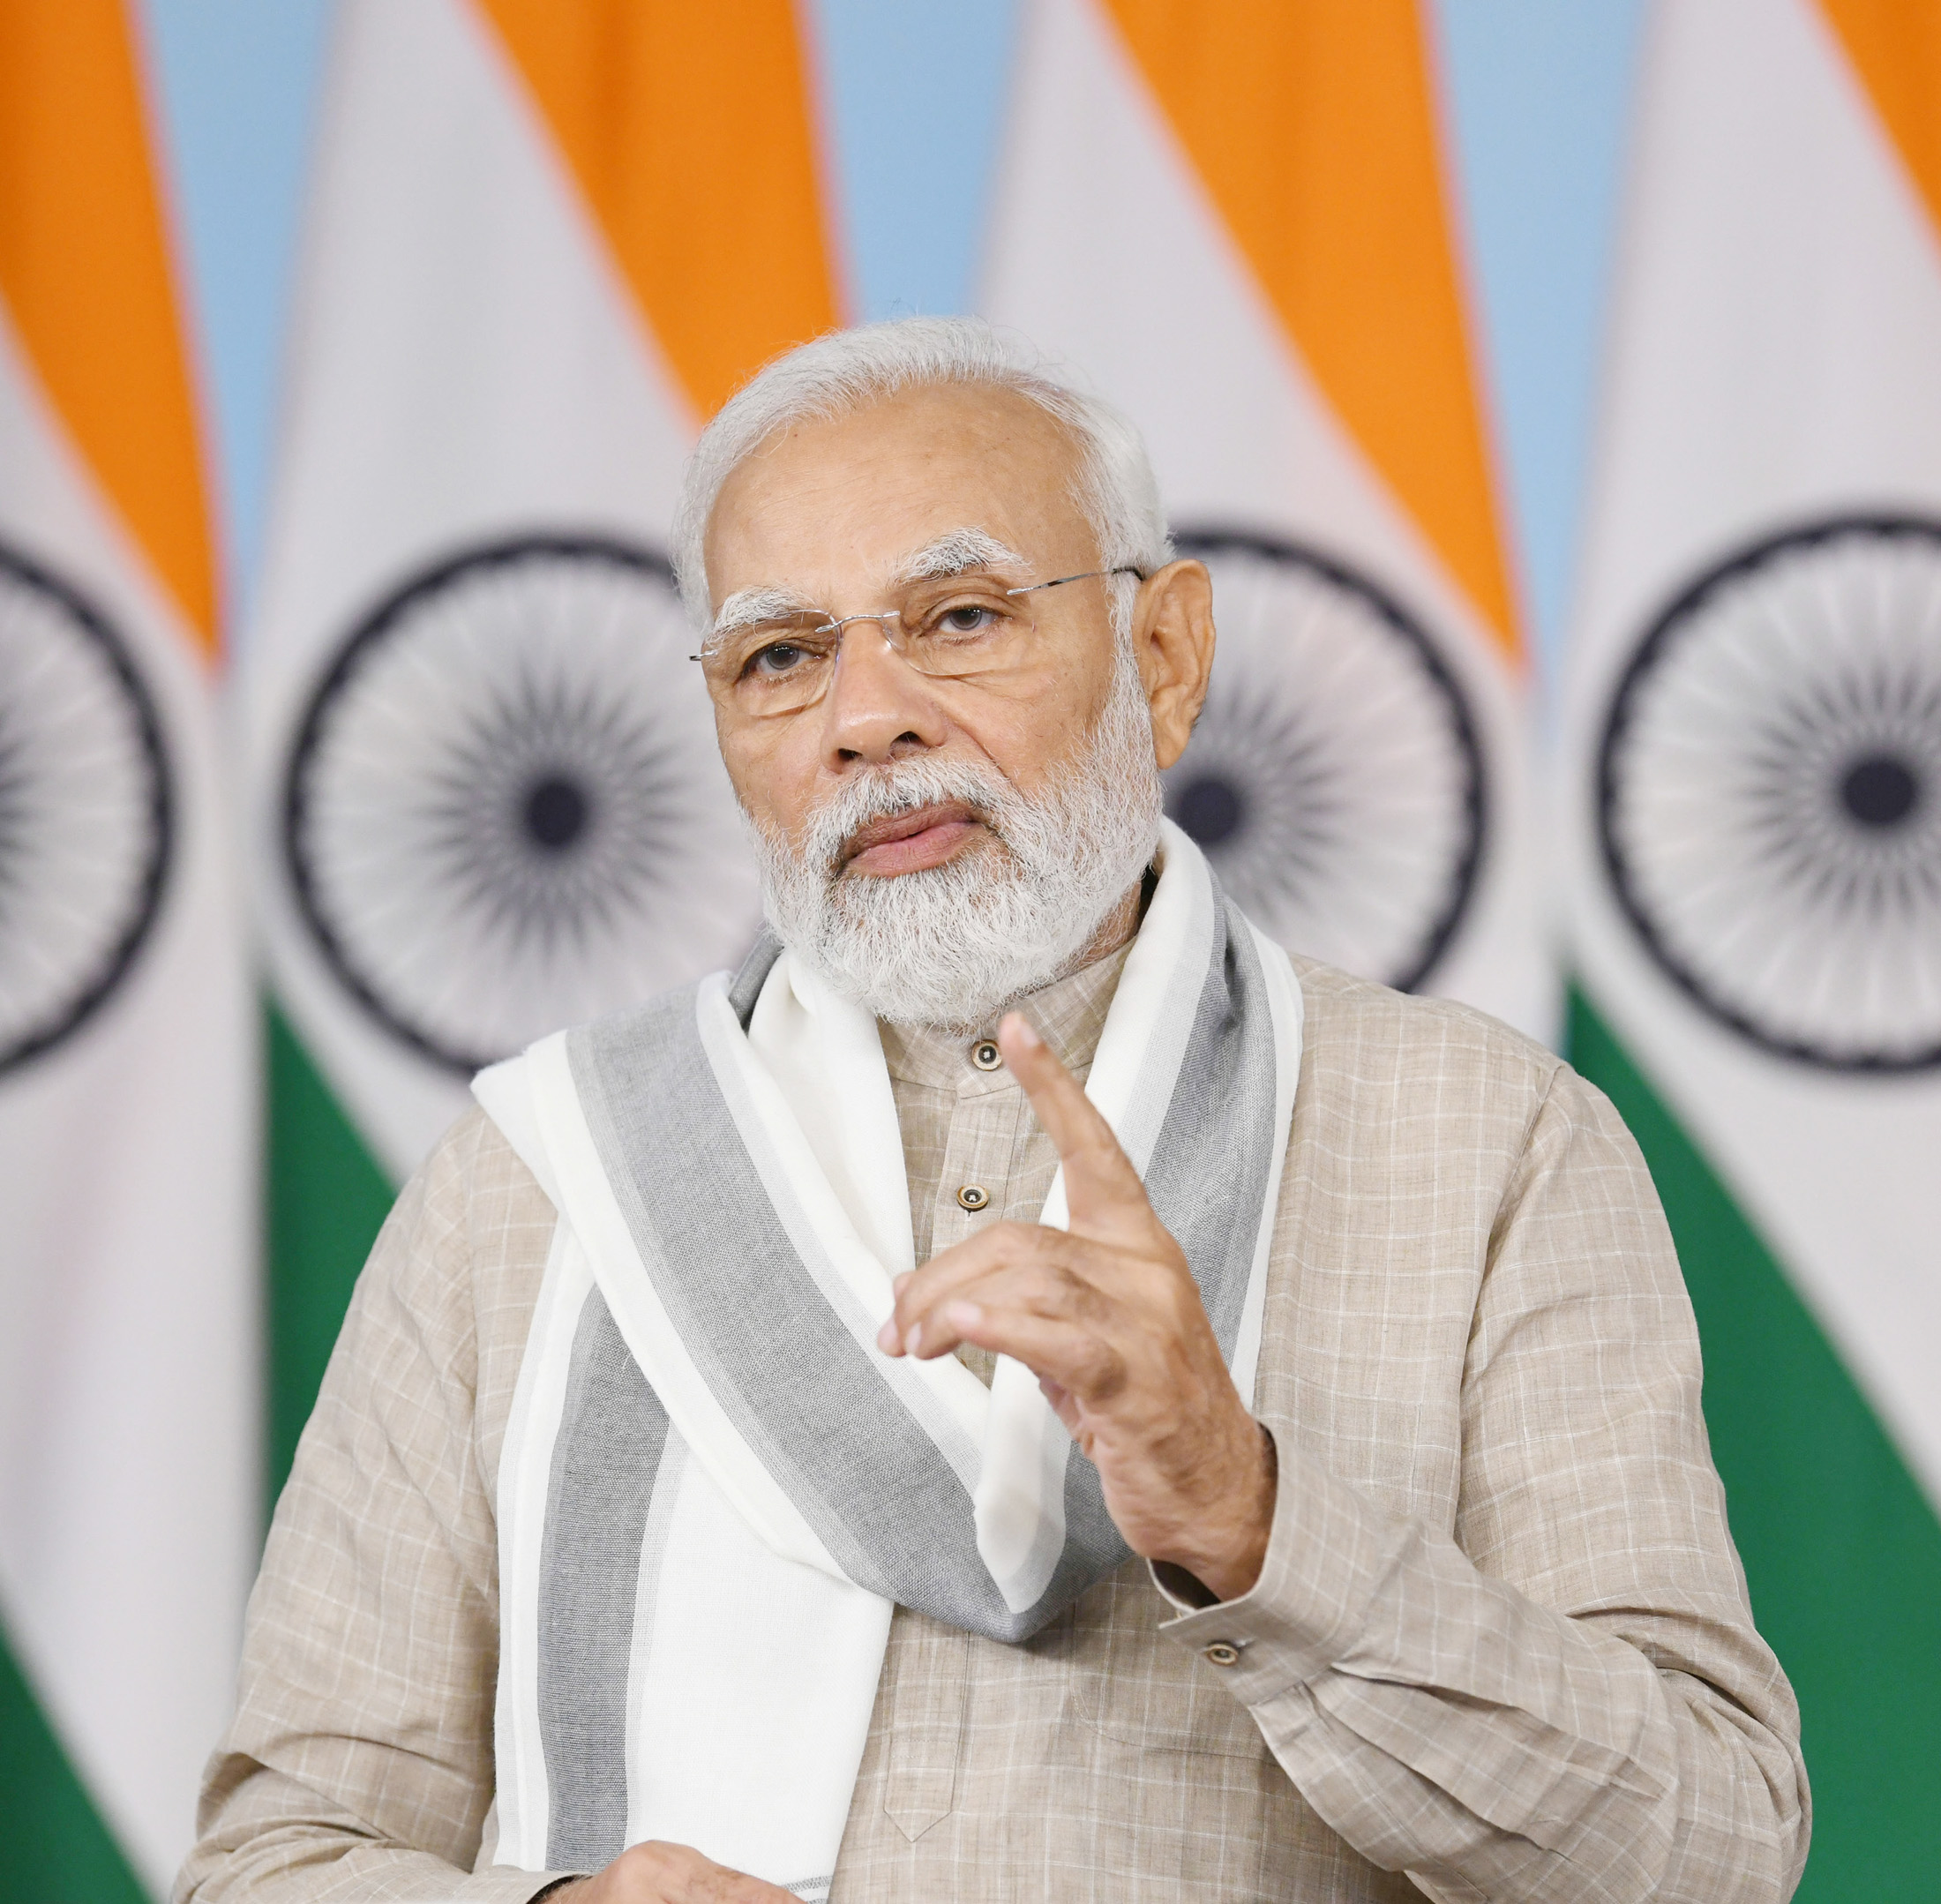 PM Modi to flag off first Vande Bharat Express in Uttarakhand on May 25th